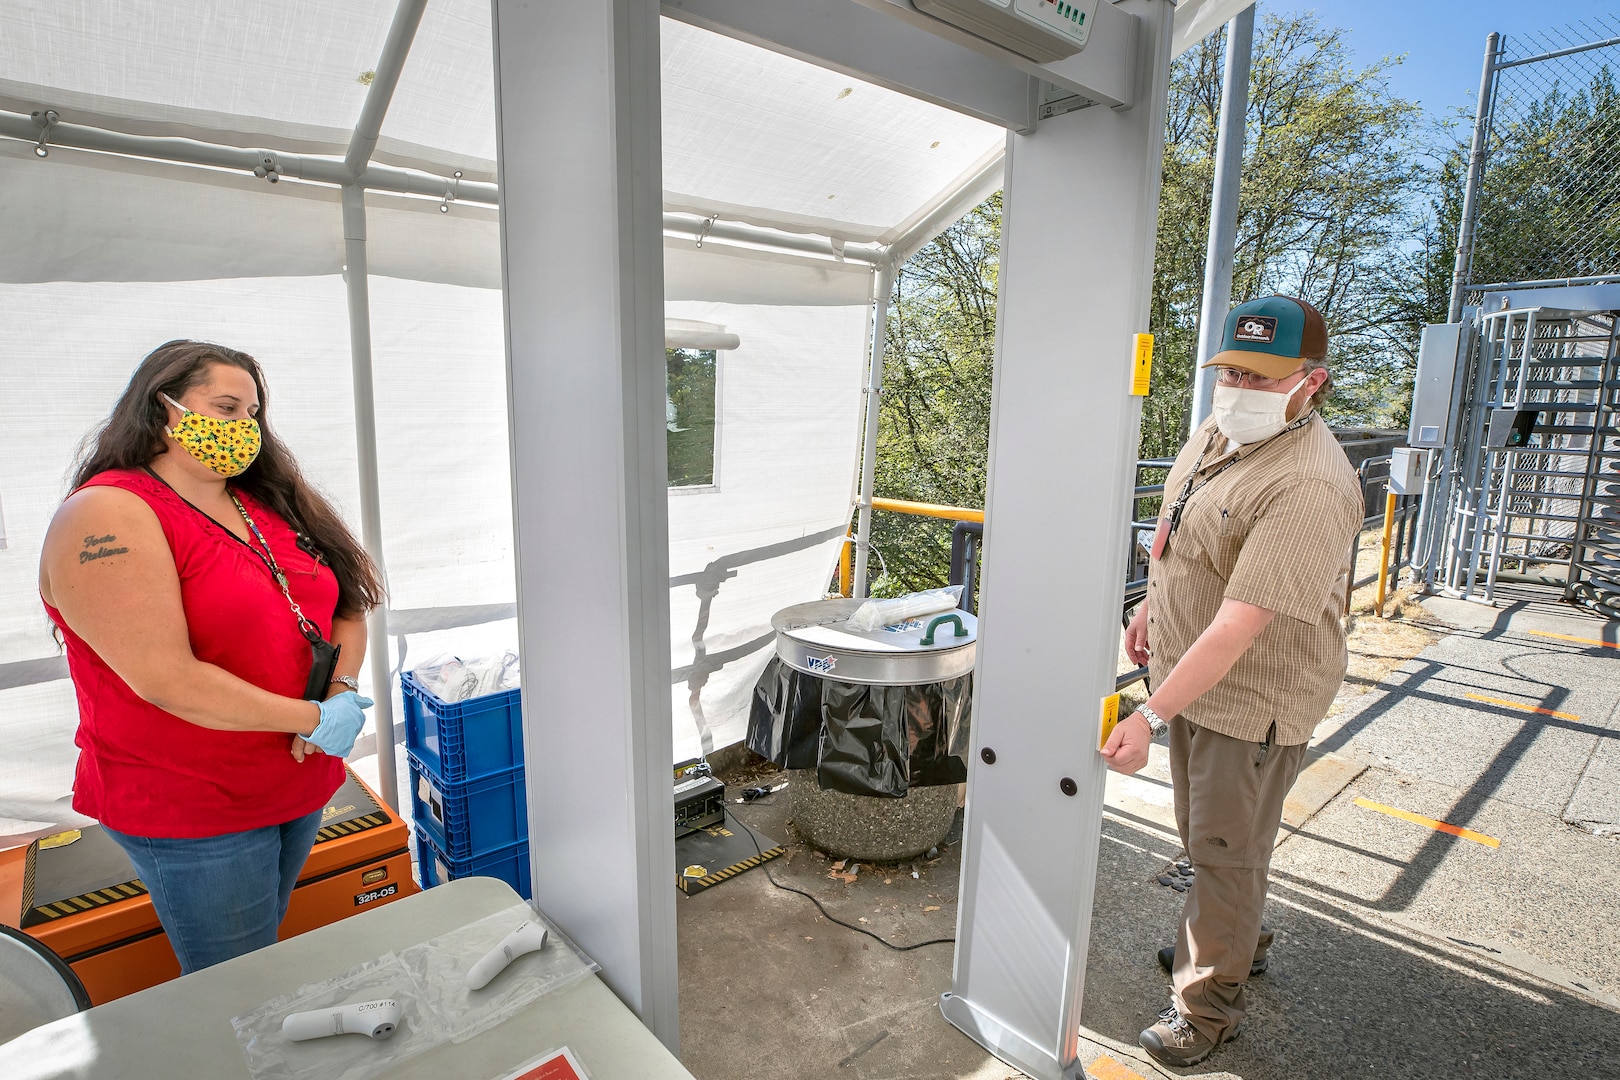 Julie Holter, left, Code 308 facility manager representative, assists Trevor Cox, right, Code 2340 nuclear chief test engineer, while he checks his temperature using a newly-installed SafeCheck infrared body temperature detector Aug. 25, 2020 inside the Decatur Gate at Puget Sound Naval Shipyard & Intermediate Maintenance Facility in Bremerton, Washington.